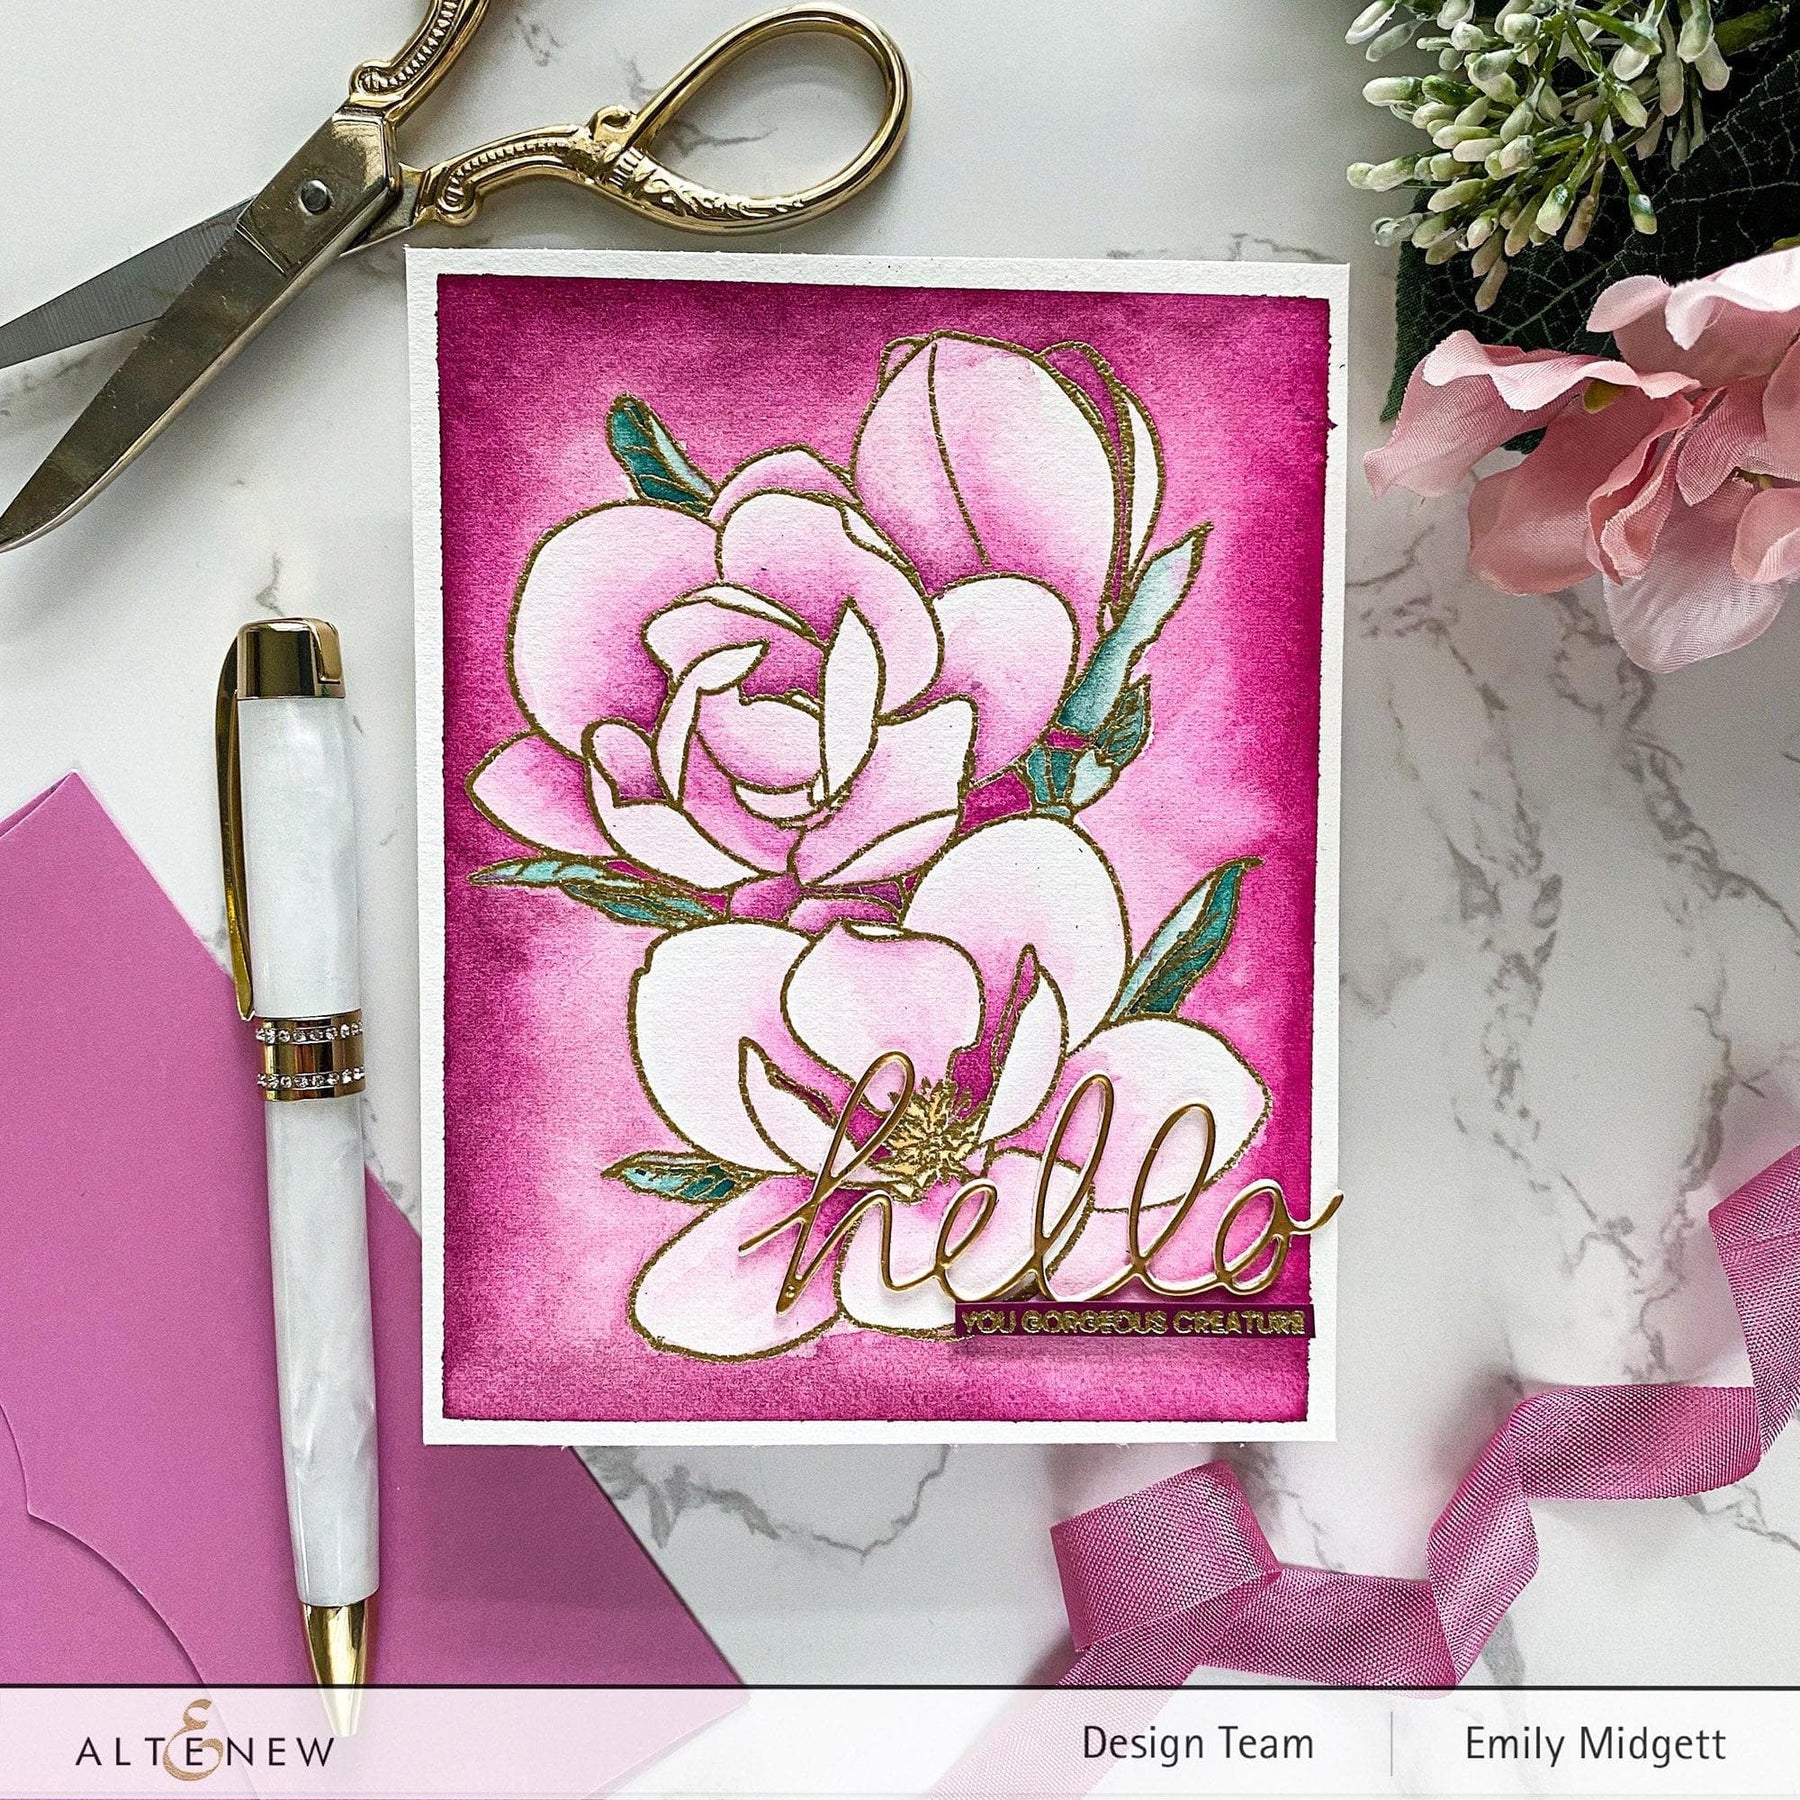 Mangocraft Original Design Painted Flowers Floral Stamps And